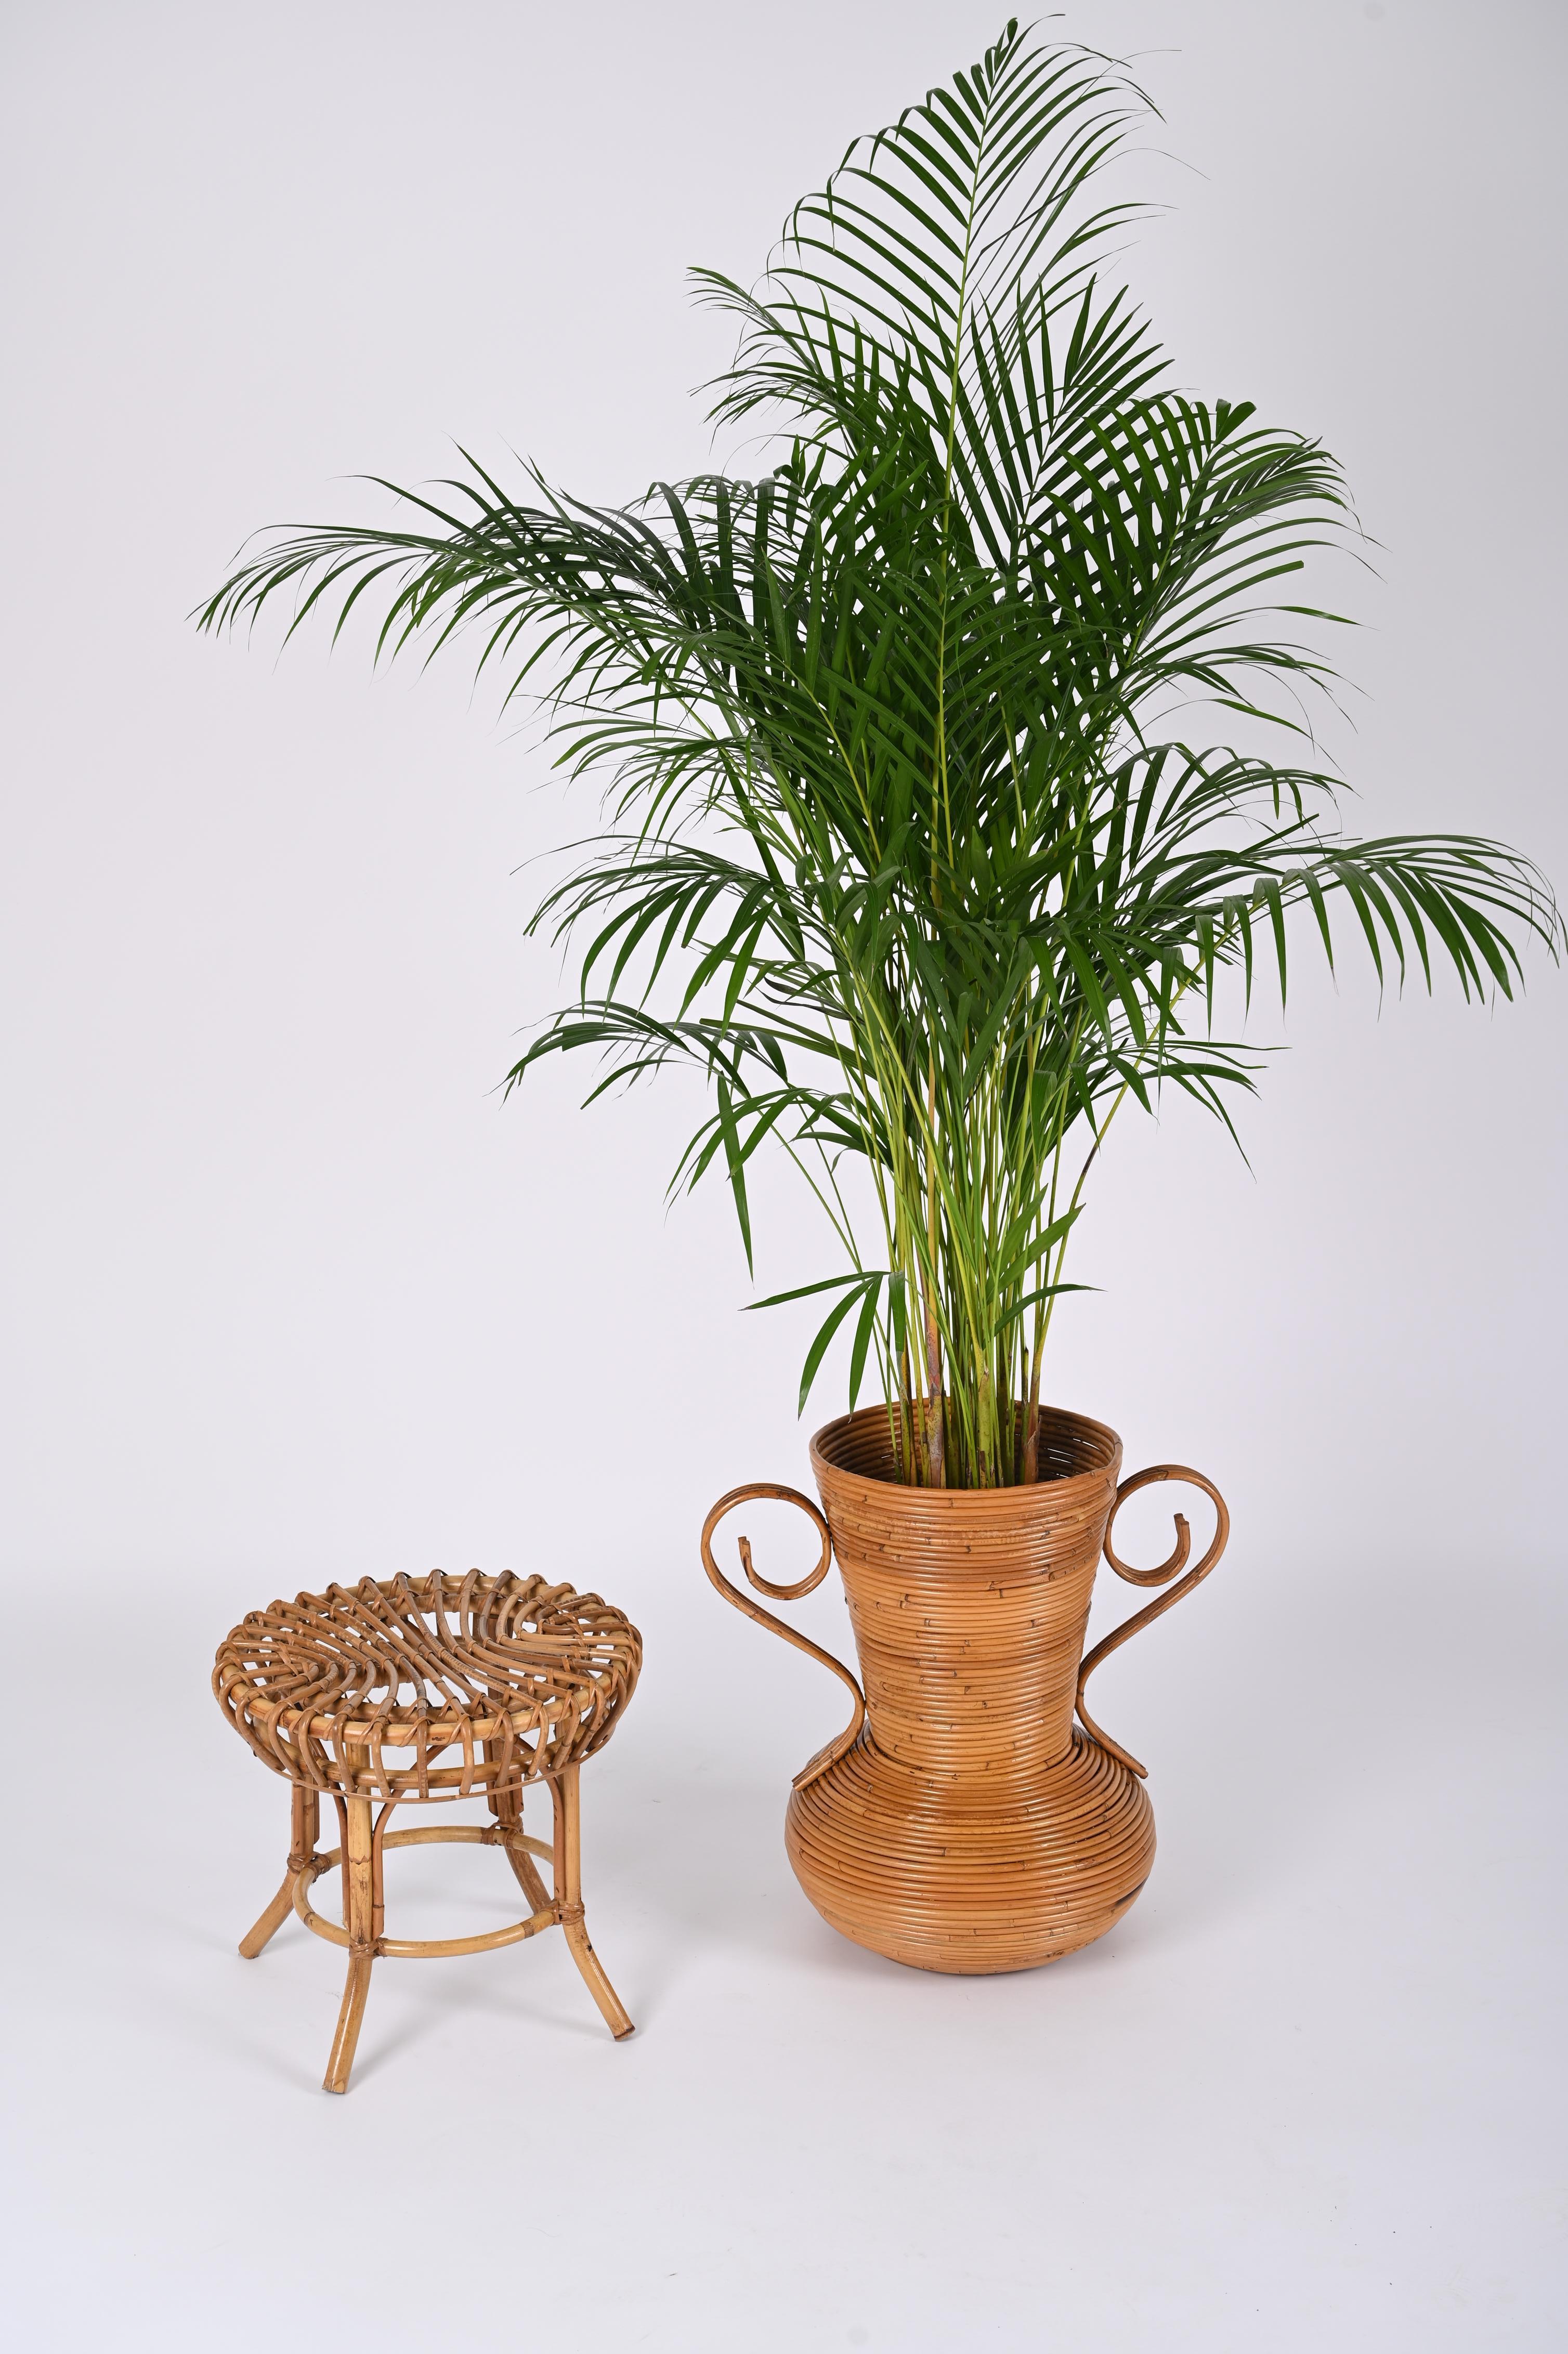 Midcentury Bamboo and Rattan Decorative Vase, by Vivai del Sud, Italy, 1970s For Sale 9